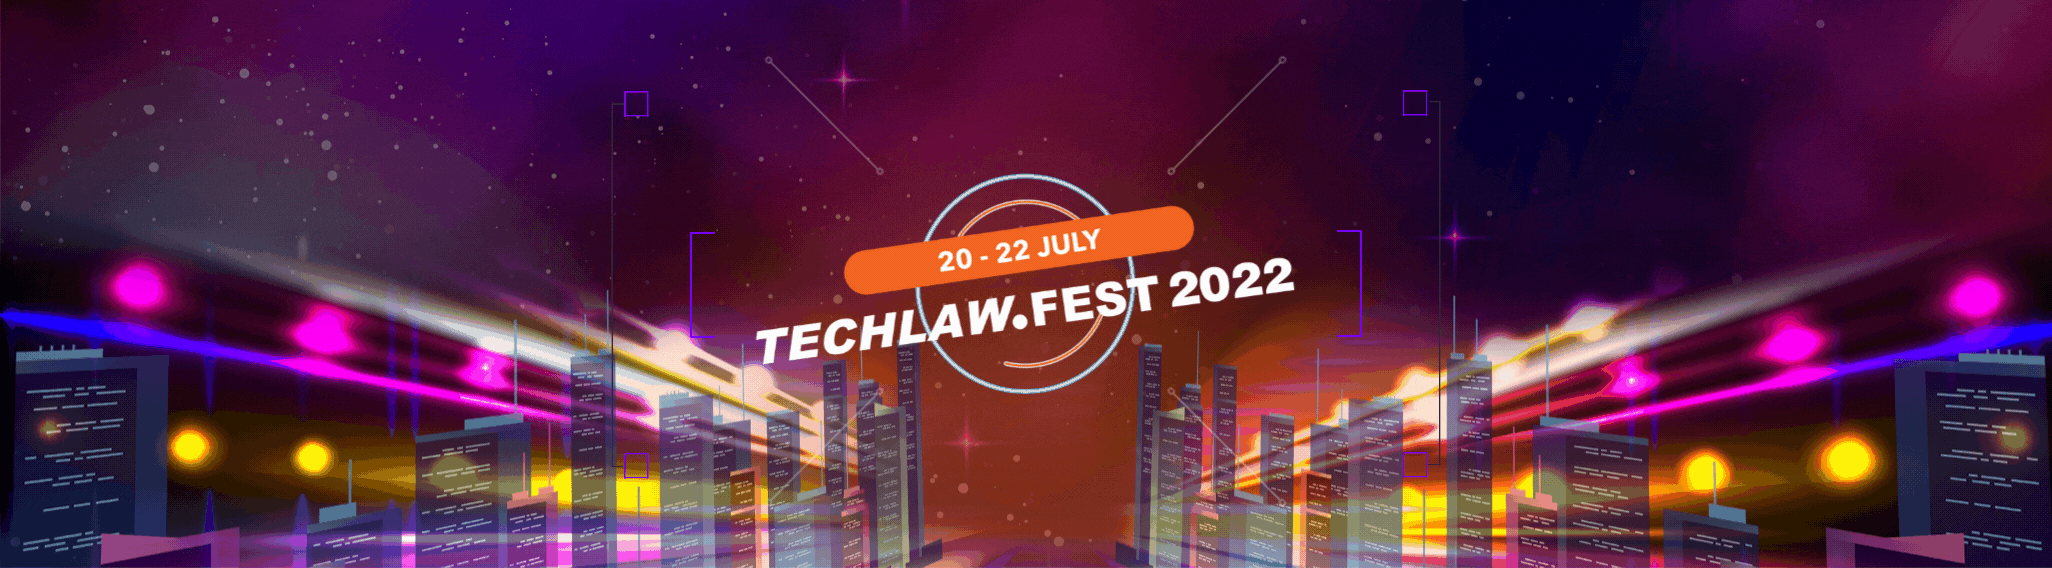 TechLaw.Fest 2022 Up Your Game